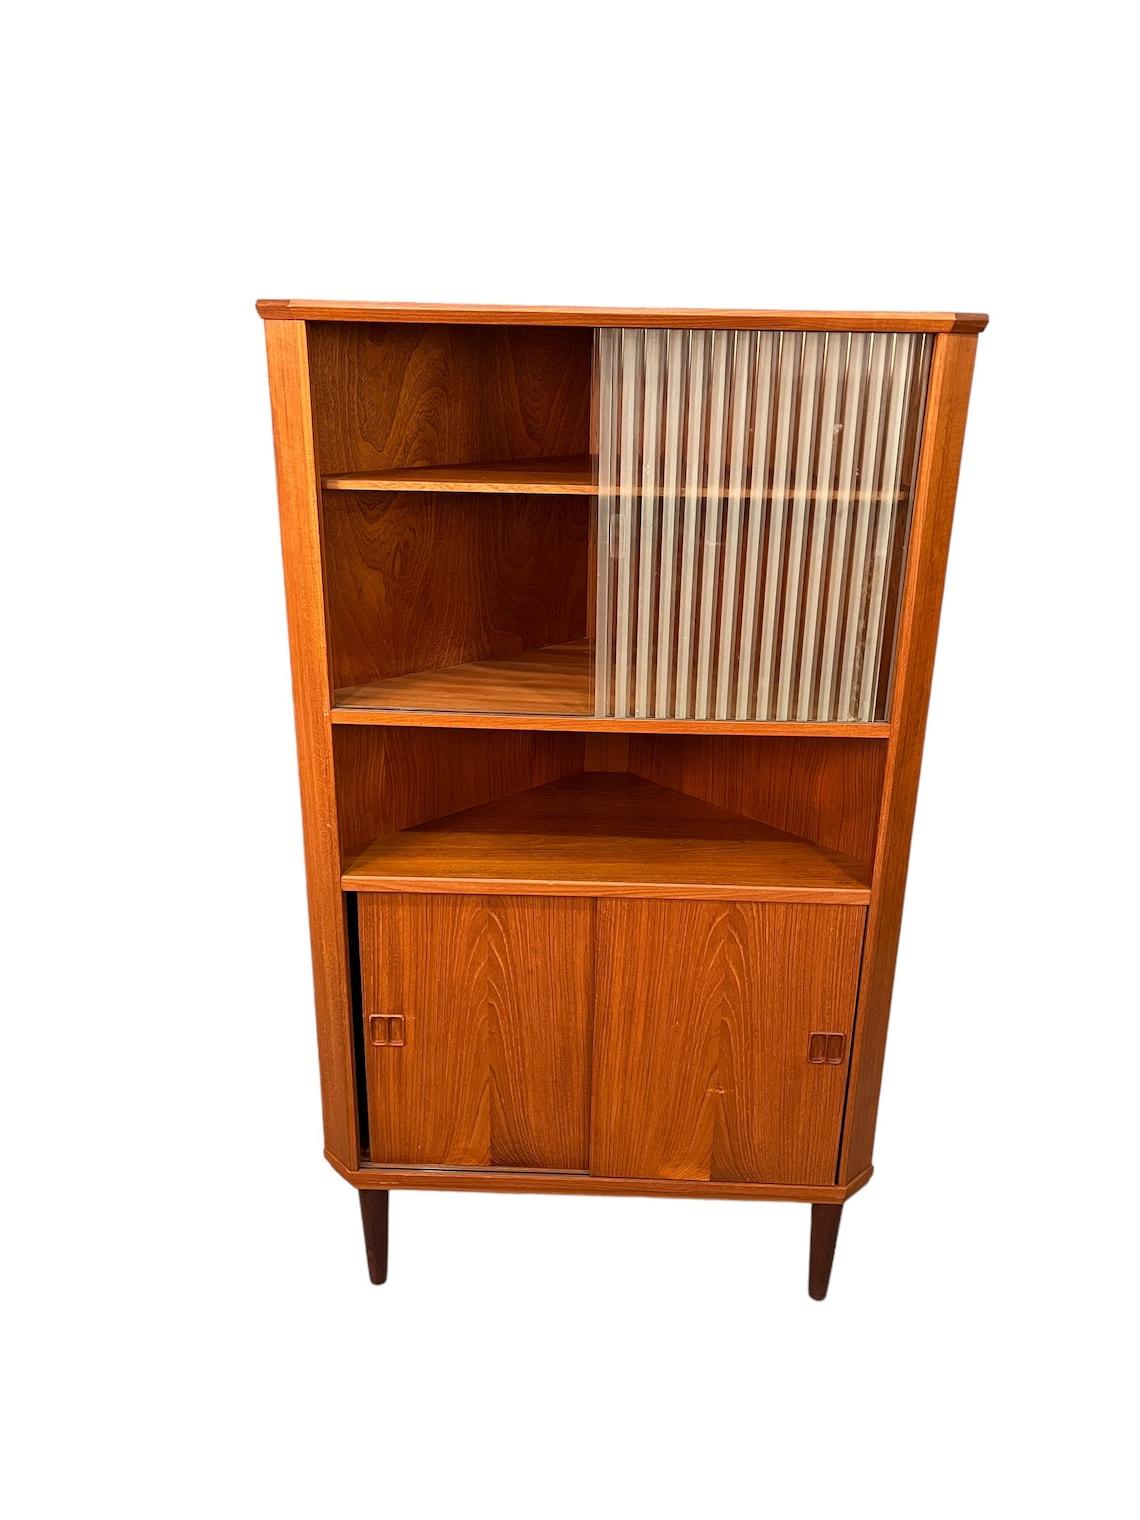 This stunning mid-century teak and glass corner cabinet is sure to be a standout piece in any home. Crafted from high-quality teak wood, this piece is both sturdy and beautiful. The glass doors allow for easy display of your favorite items, while